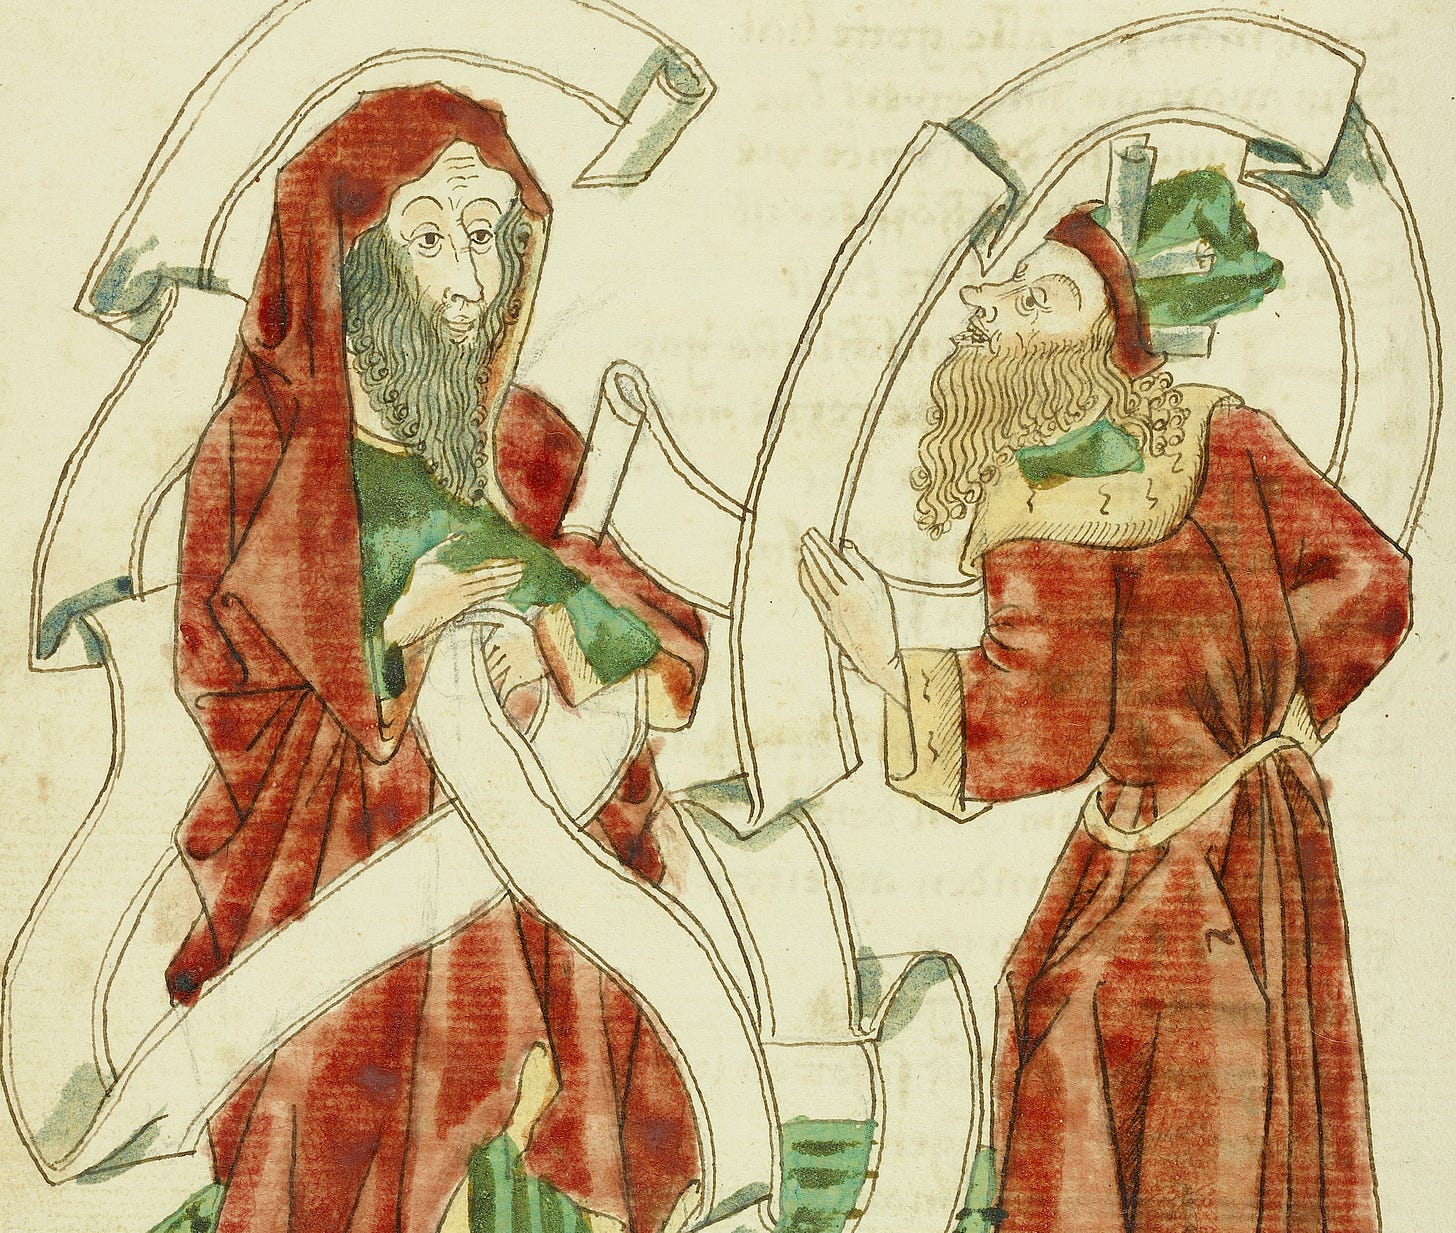 A painting of the prophets Micah and Habakku, both wearing robes of red and green, from an old Alsatian Bible manuscript